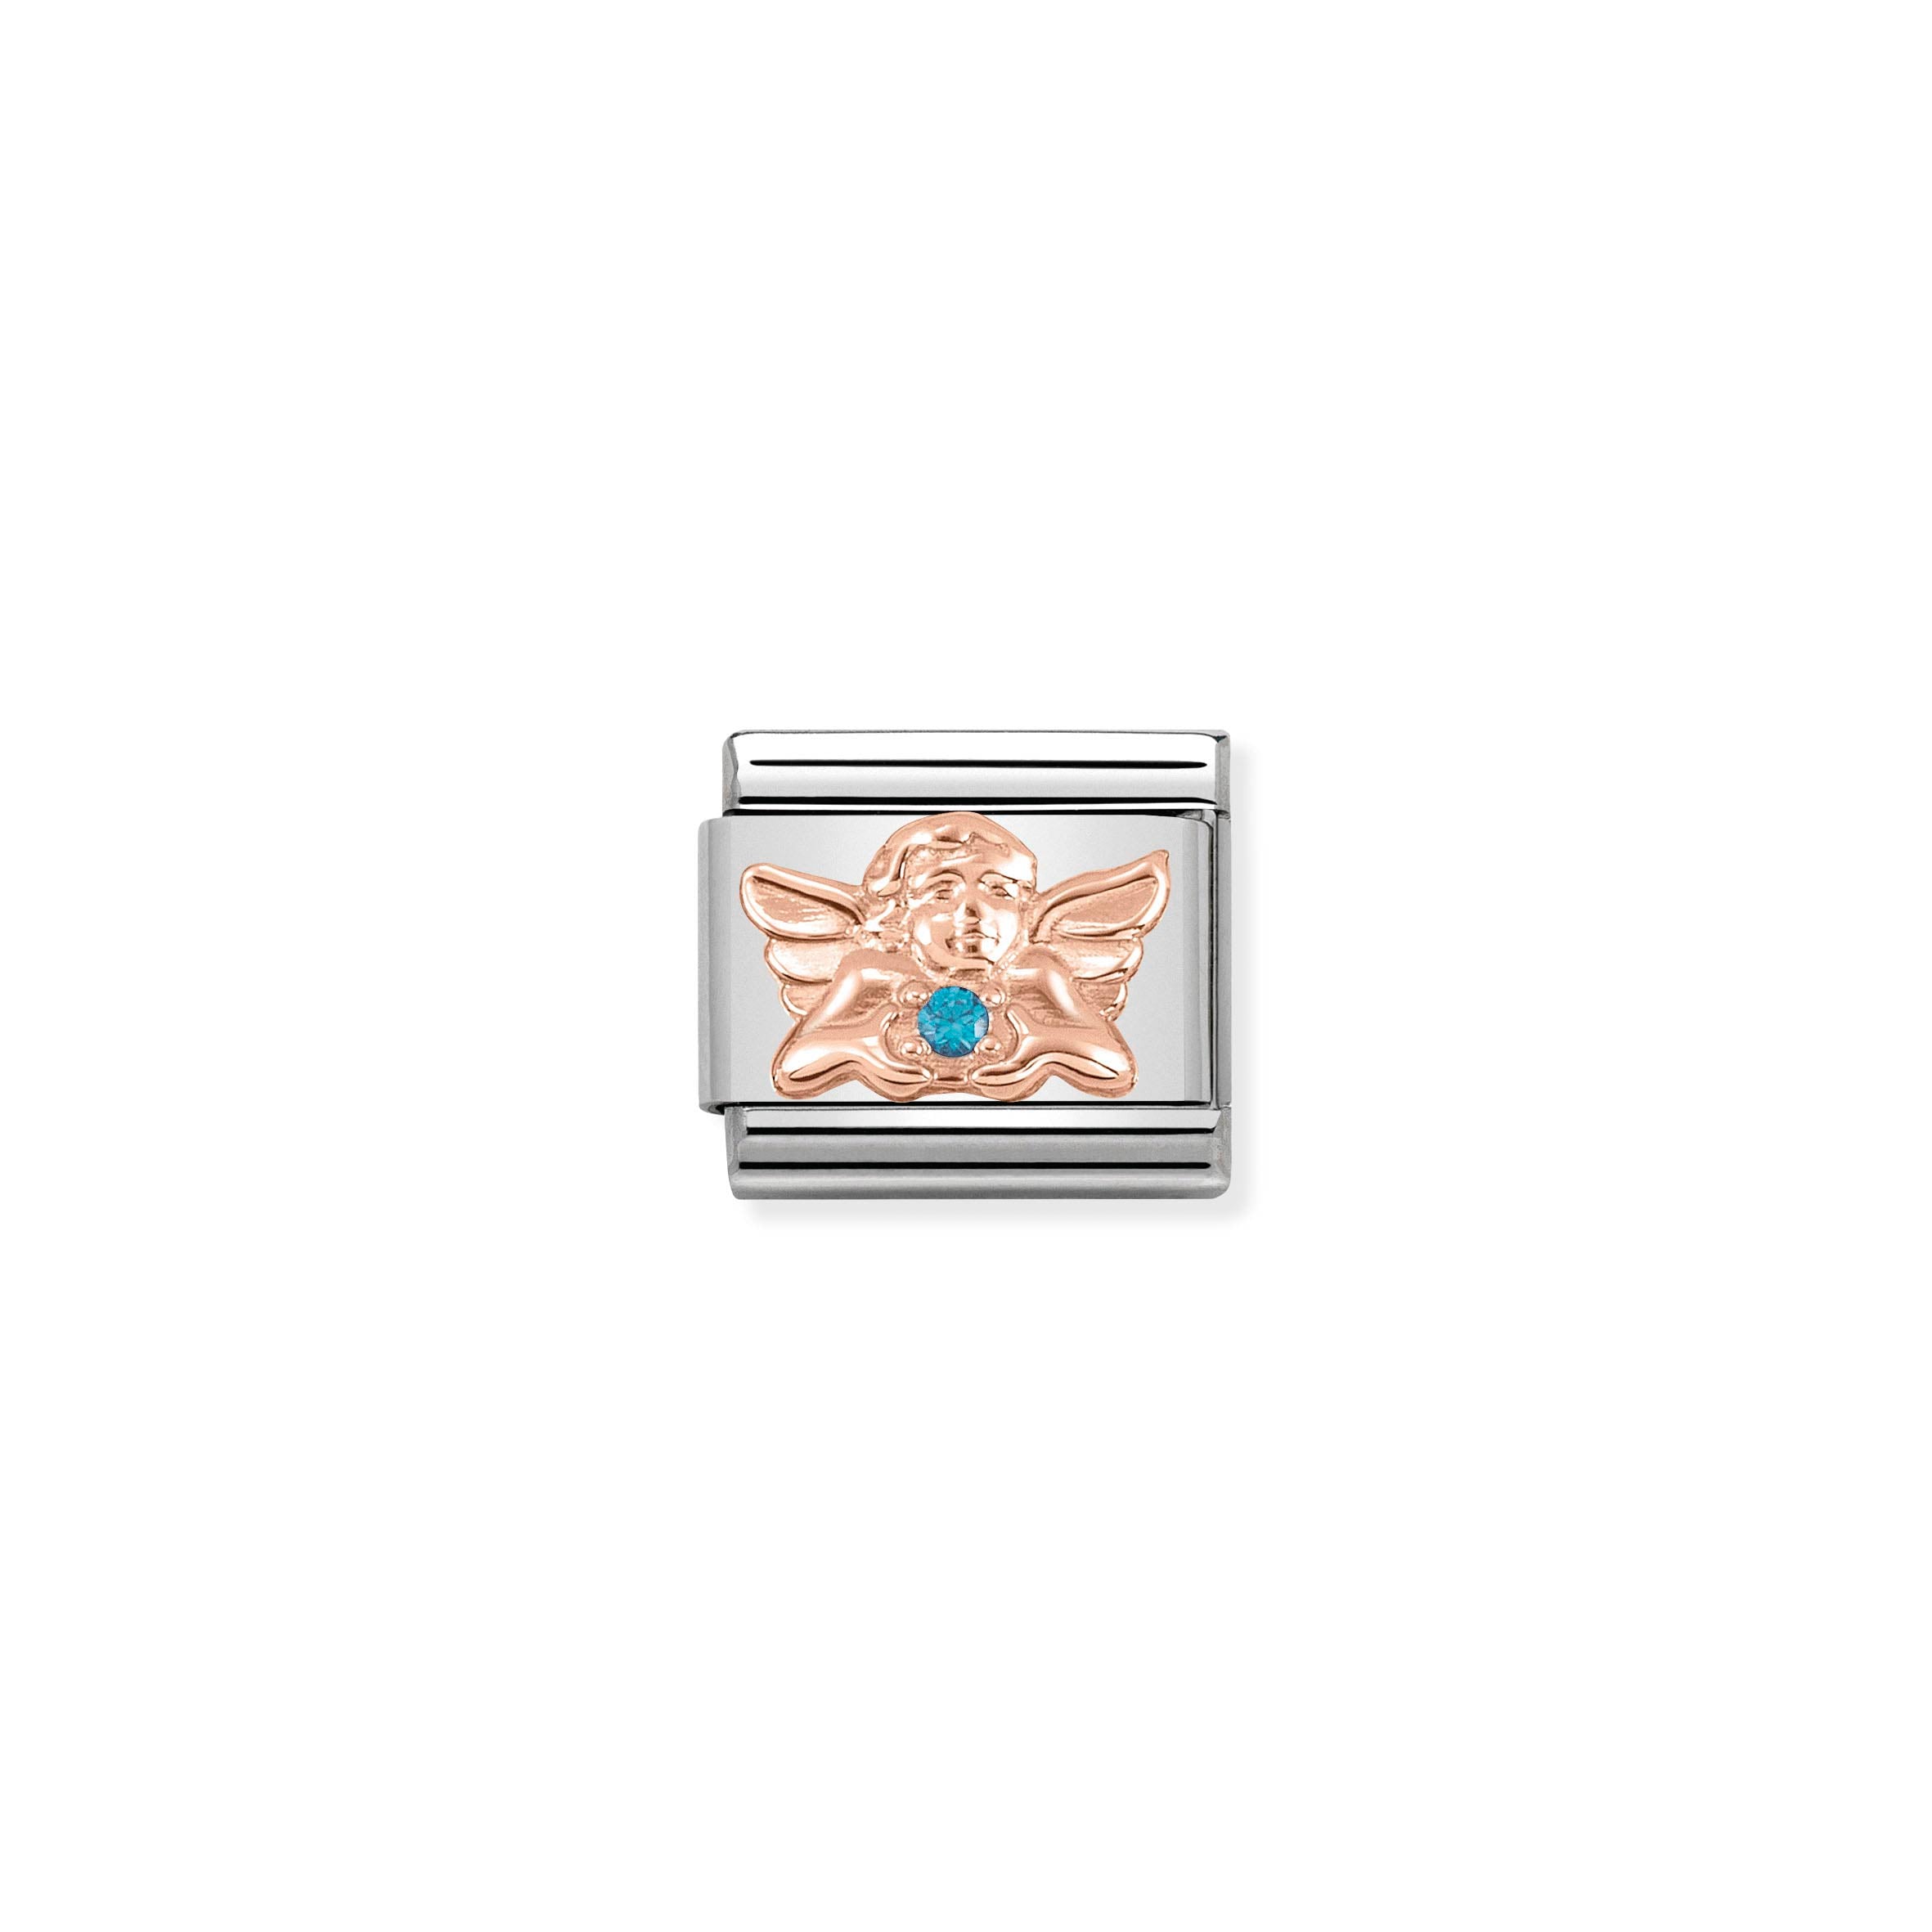 NOMINATION - Composable Classic SYMBOL st/steel, cz & 9ct rose gold (Angel of Children)